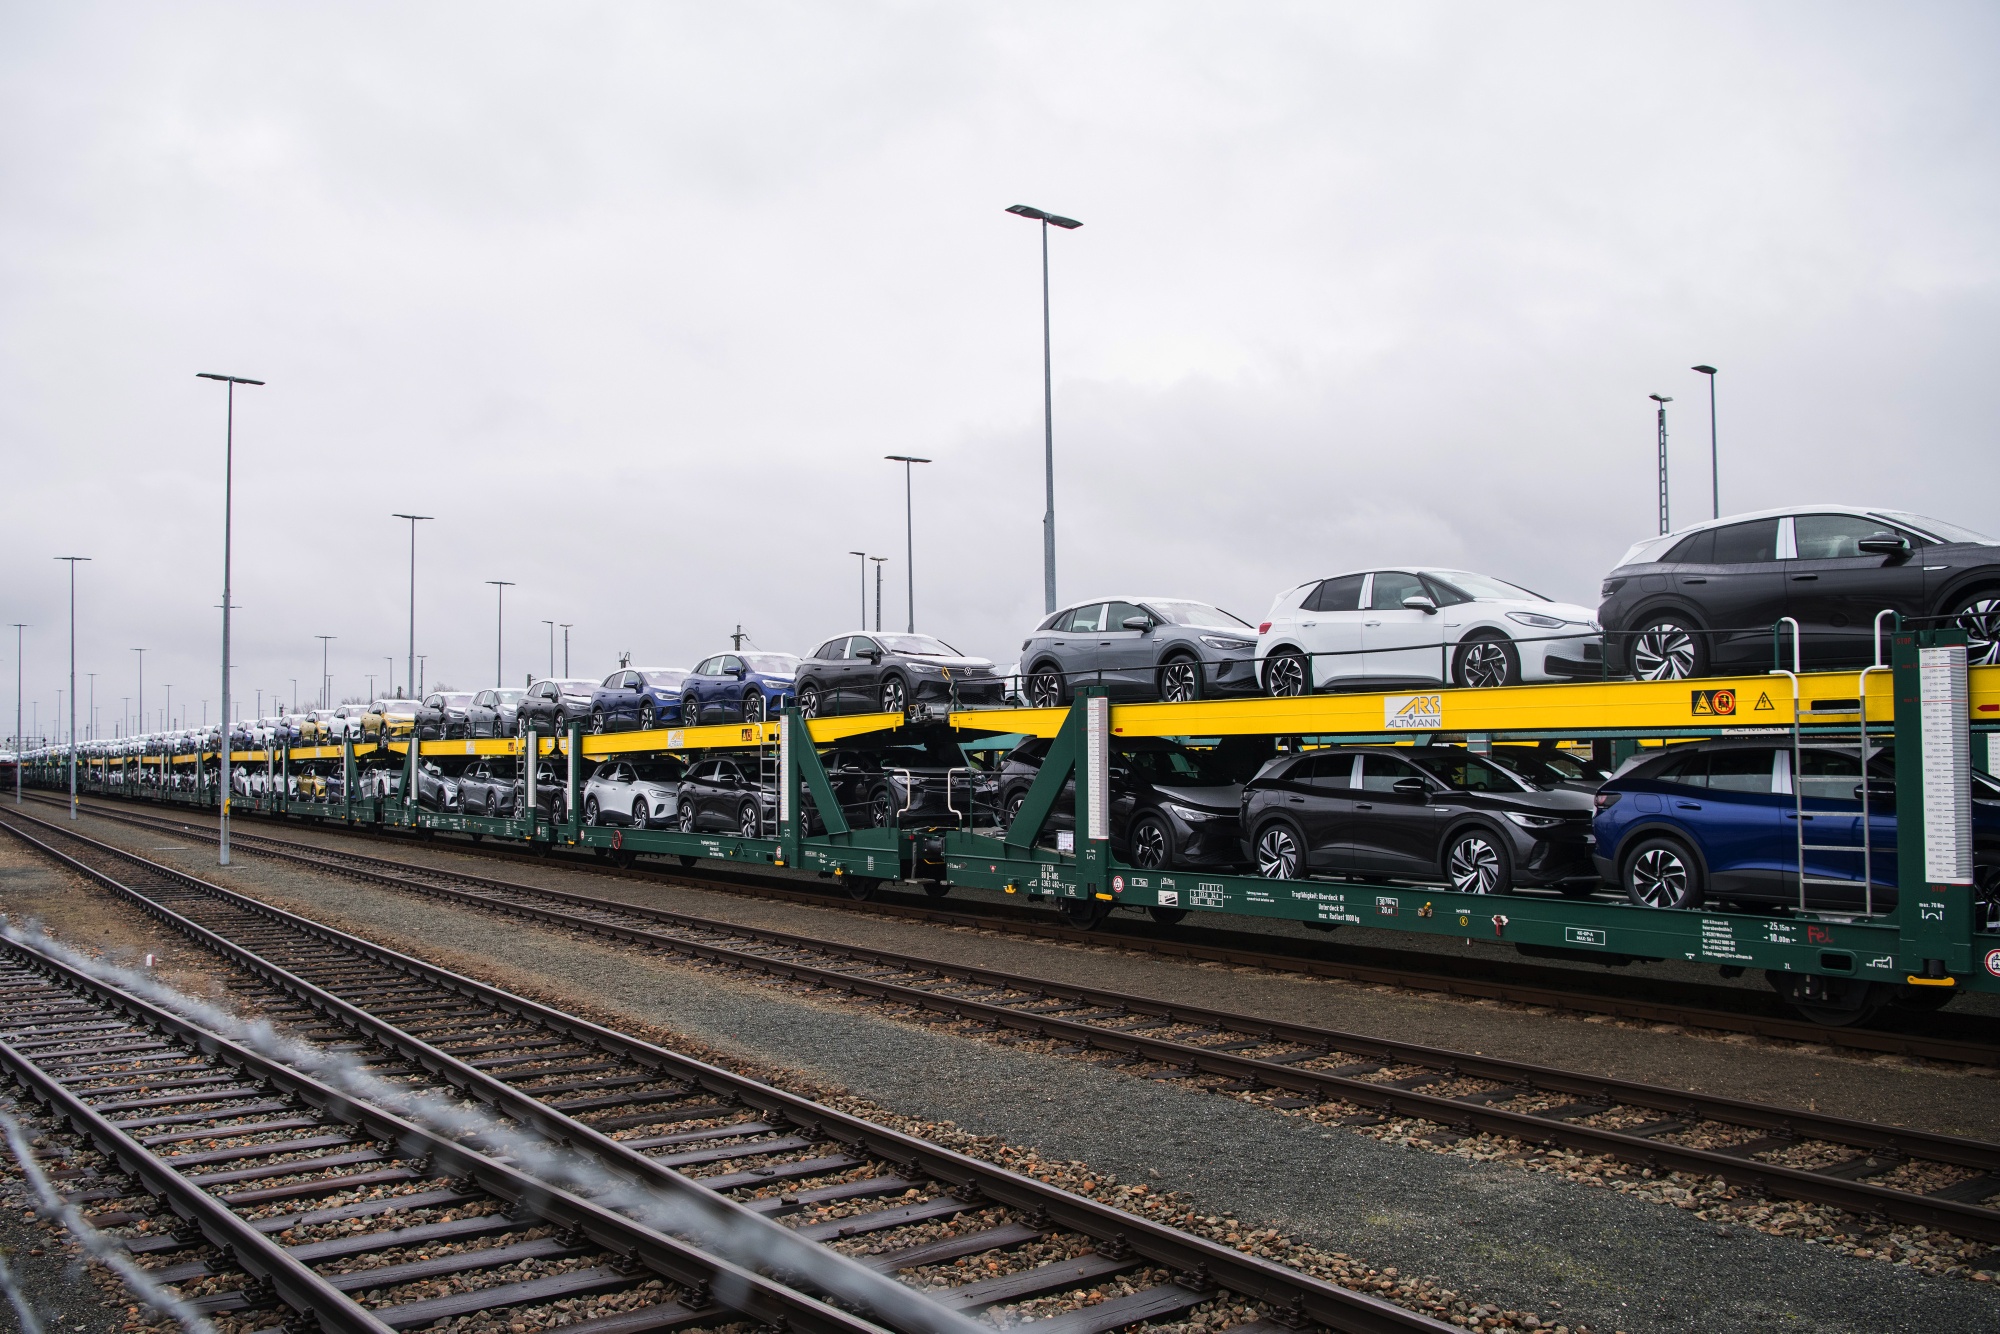 Volkswagen ID.3 and ID.4 electric automobiles on a railway vehicle transporter in Zwickau, Germany.